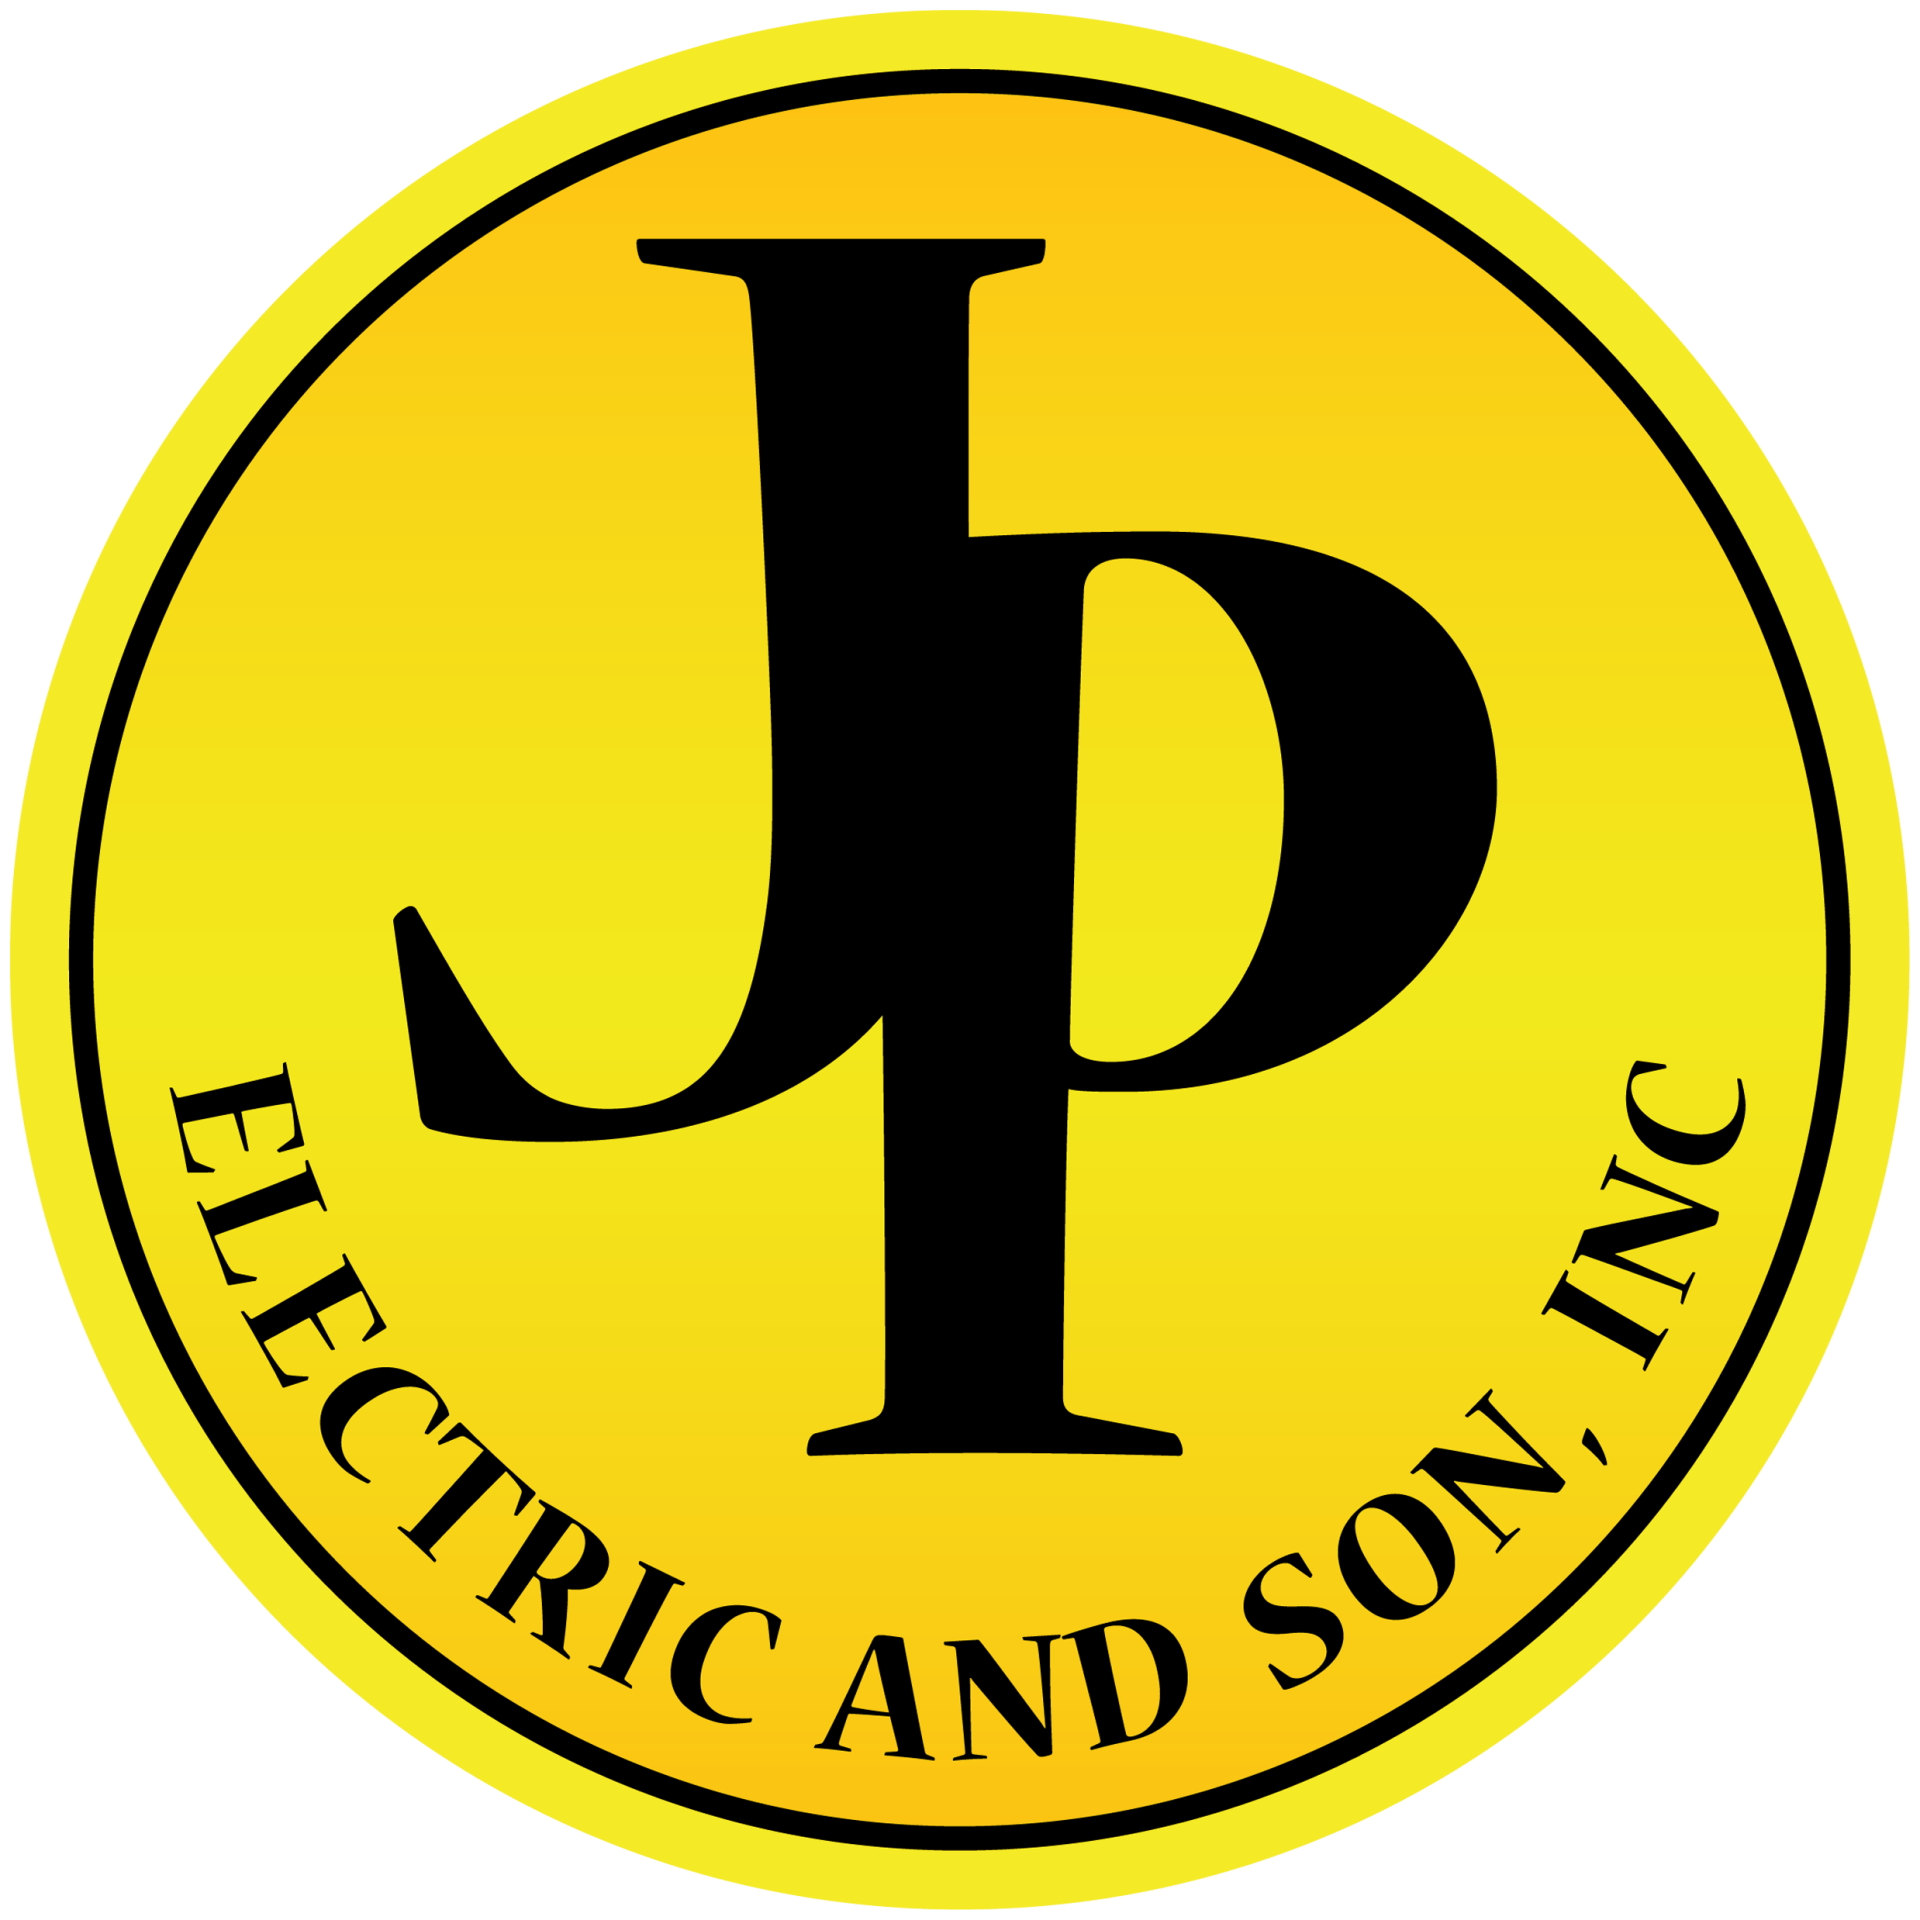 JP Electric and Son - Local, honest, professional electricians near me